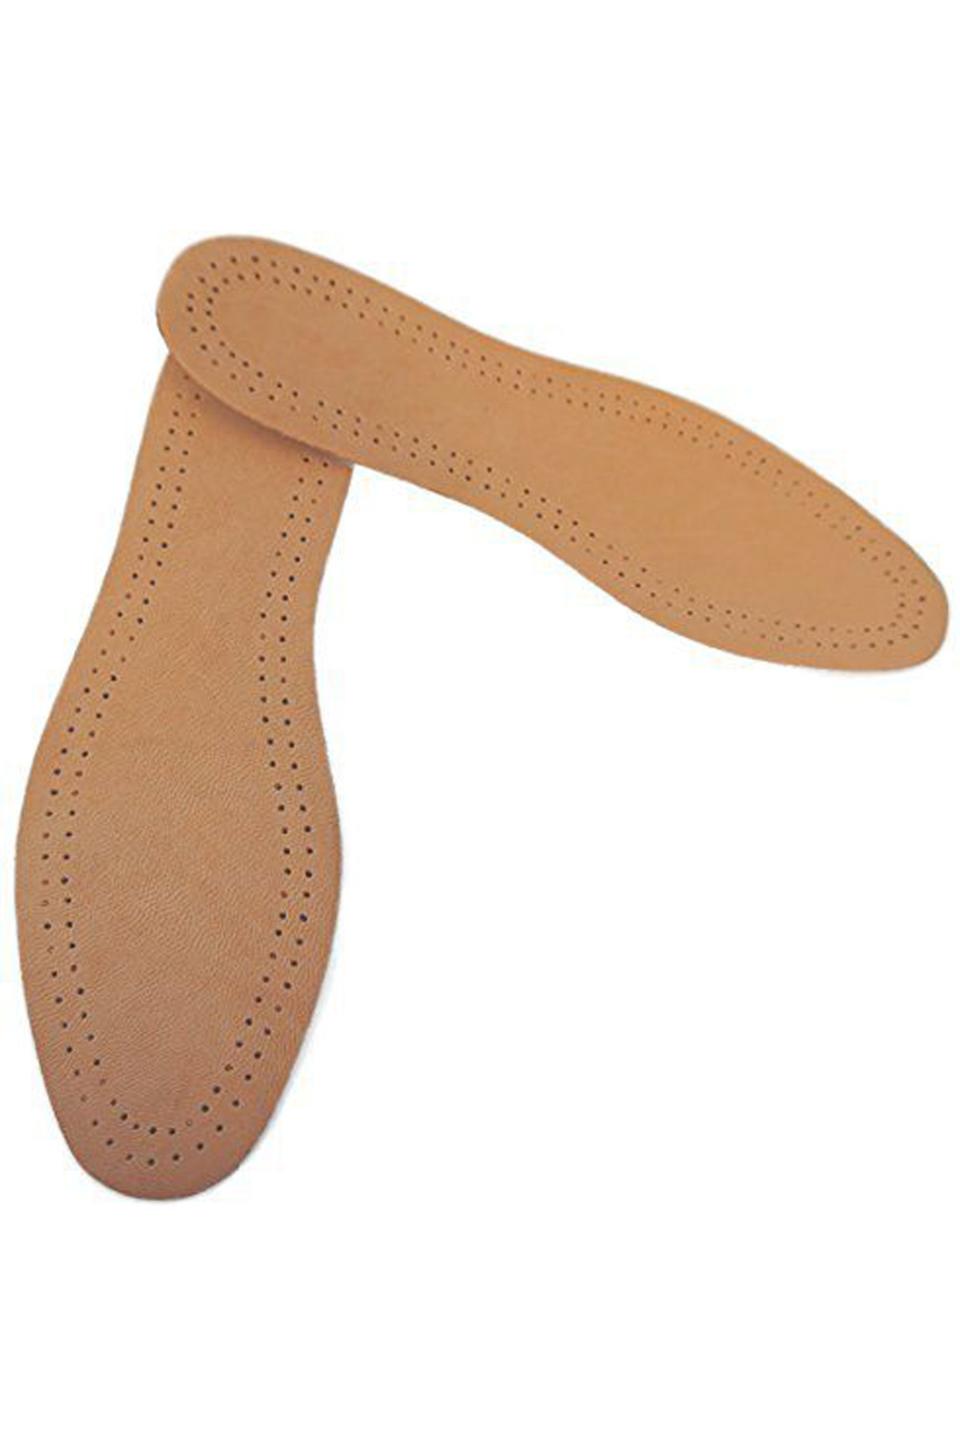 Ultra Thin Leather Insoles